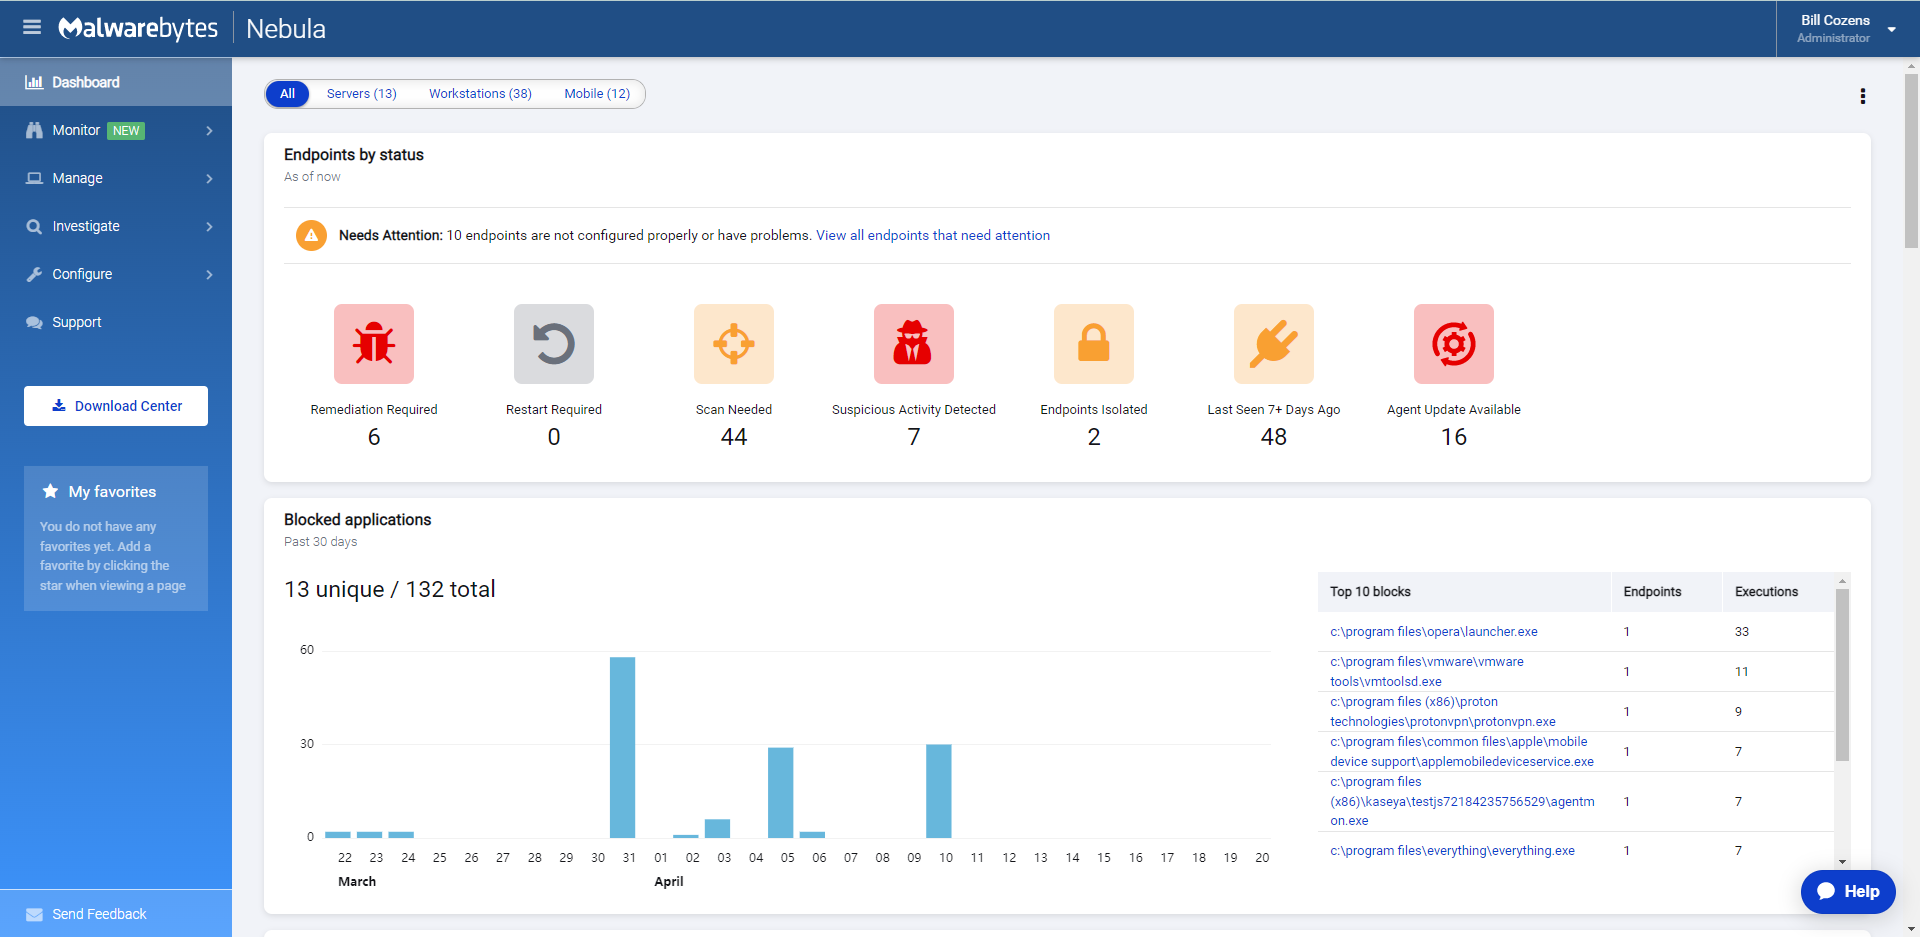 Dashboard for Nebula, the cloud-hosted security platform for EP and EDR